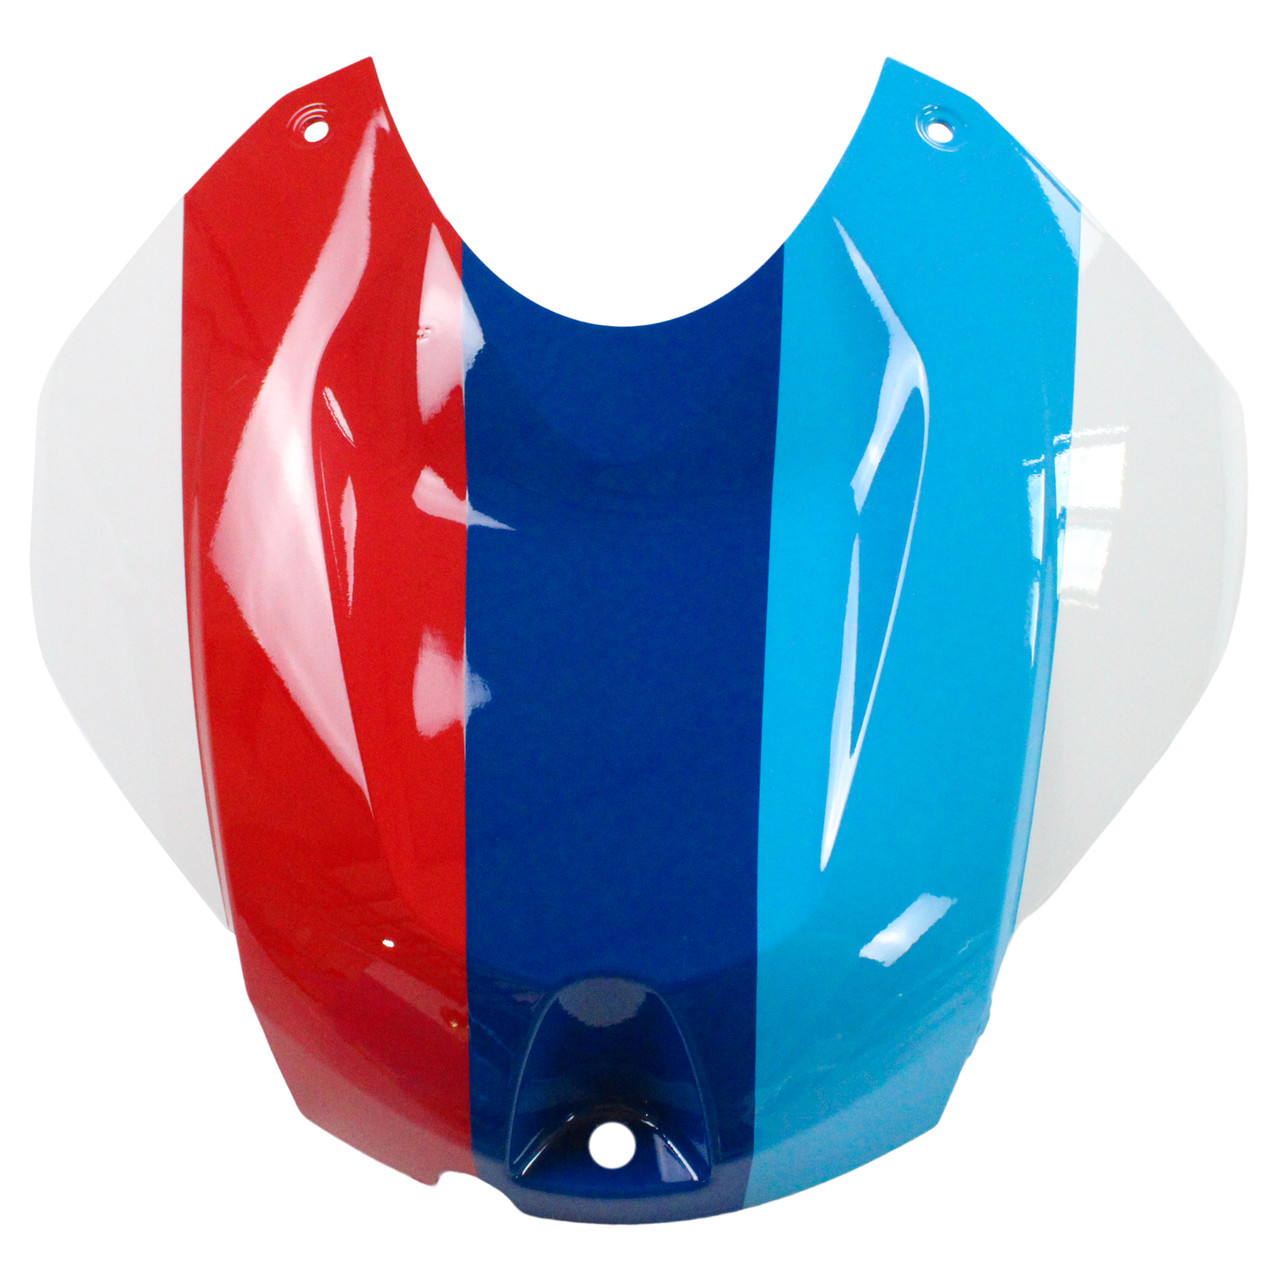 Amotopart BMW S1000RR 2015-2016 Injection Body Cover Fairing Kits 